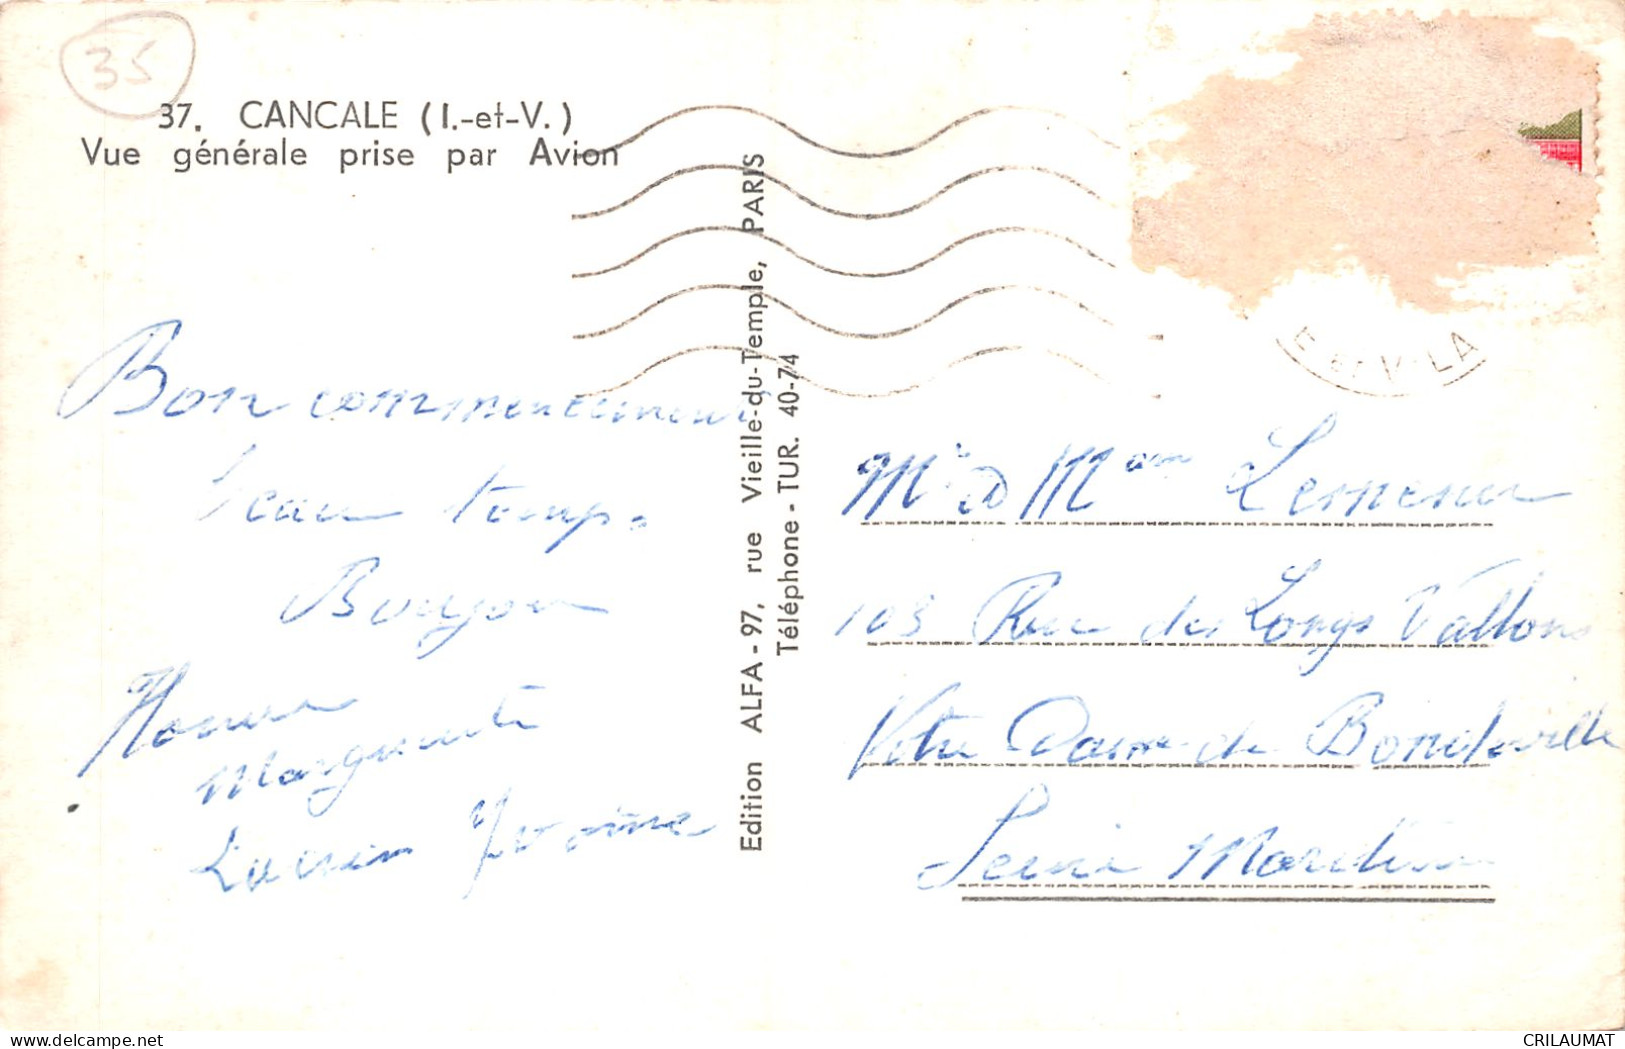 35-CANCALE-N°T5078-C/0215 - Cancale